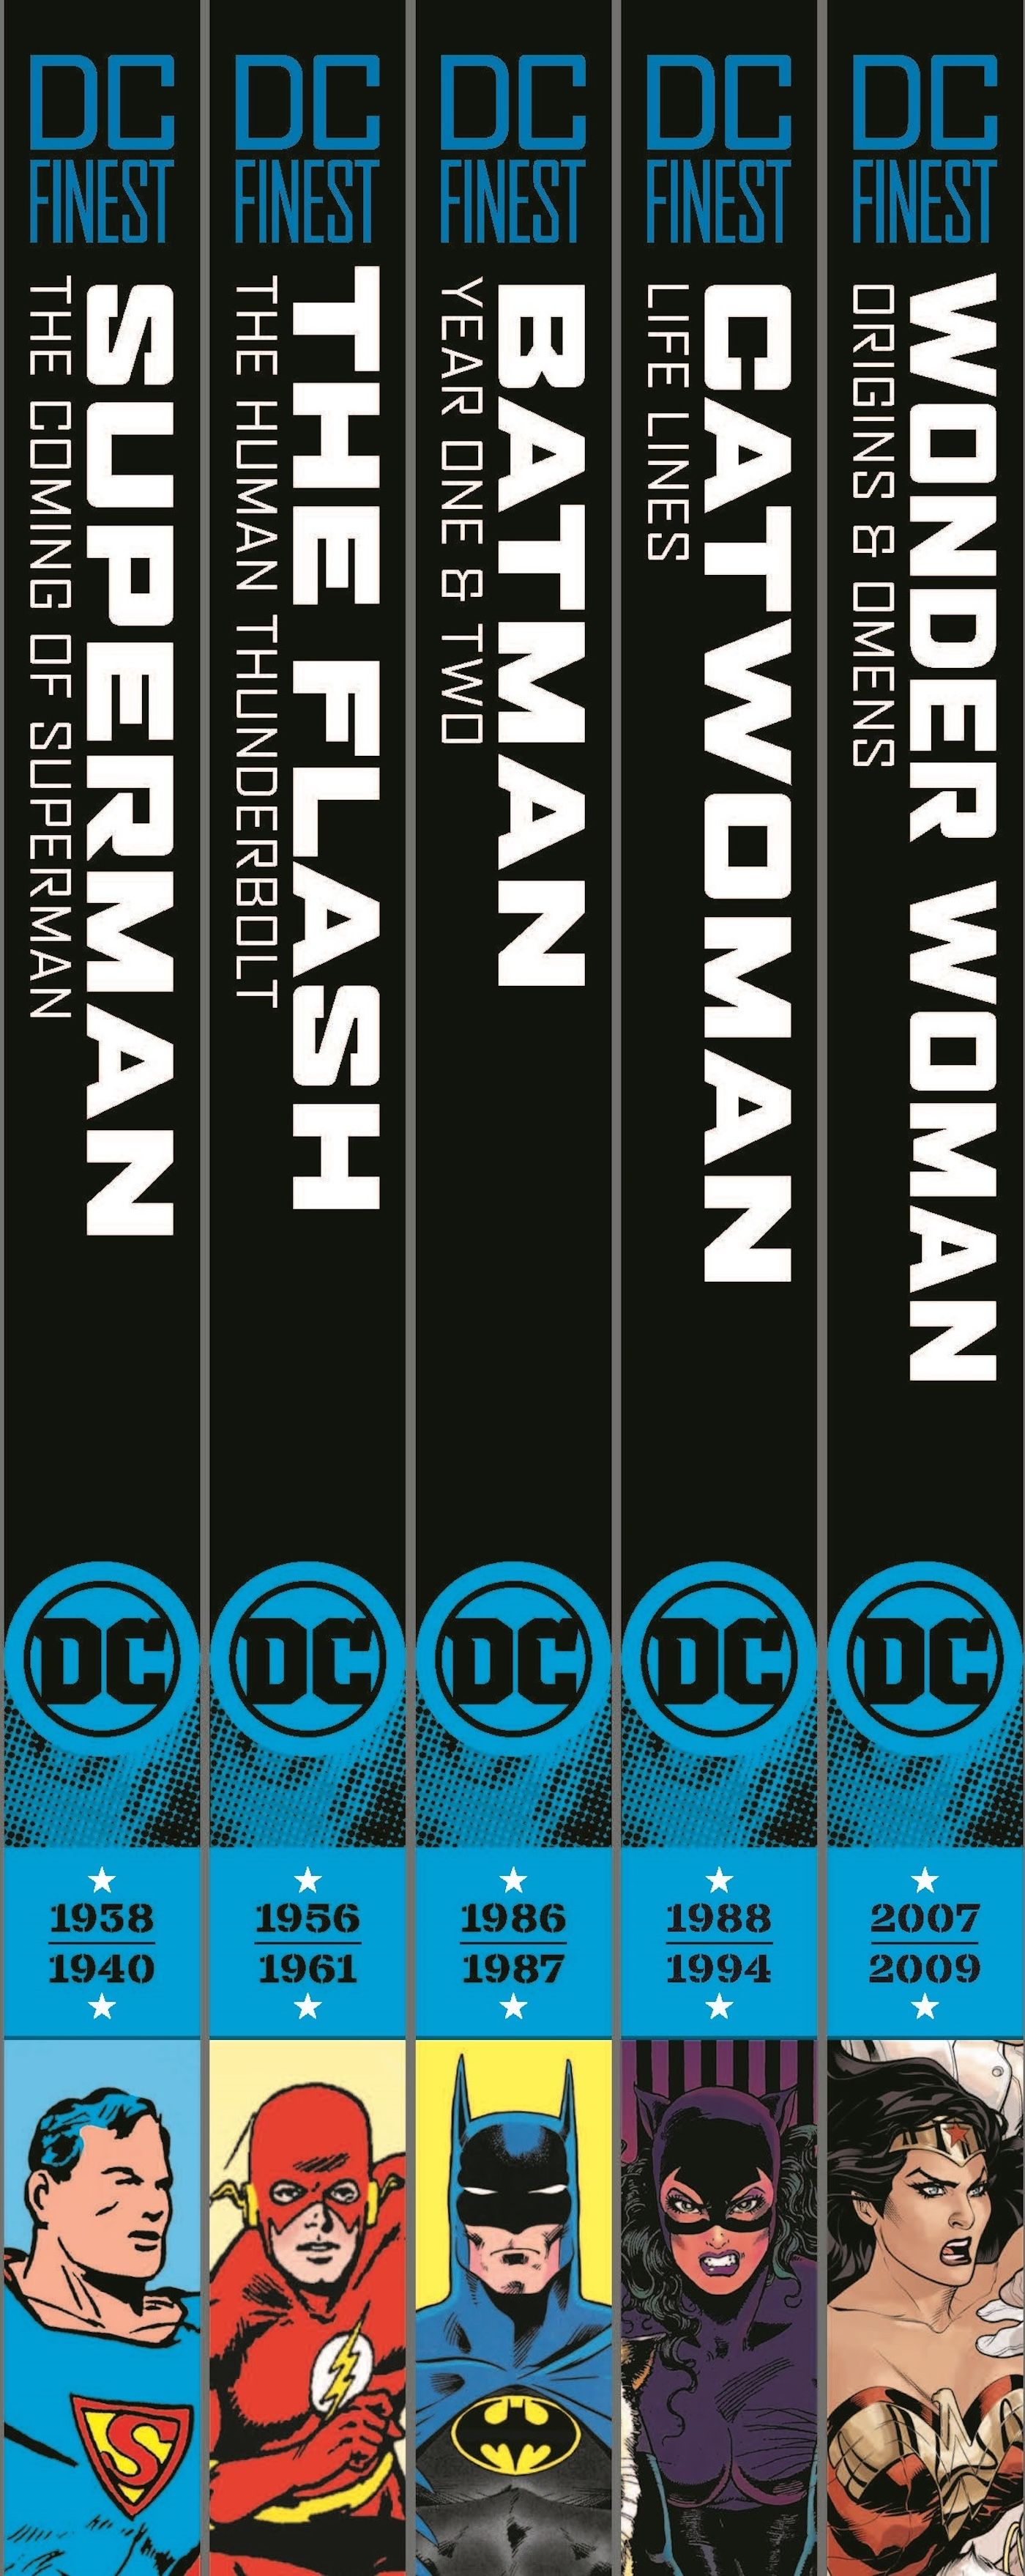 DC FINEST: New “Comprehensive Collections” to Reprint Essential DC Stories Across Time